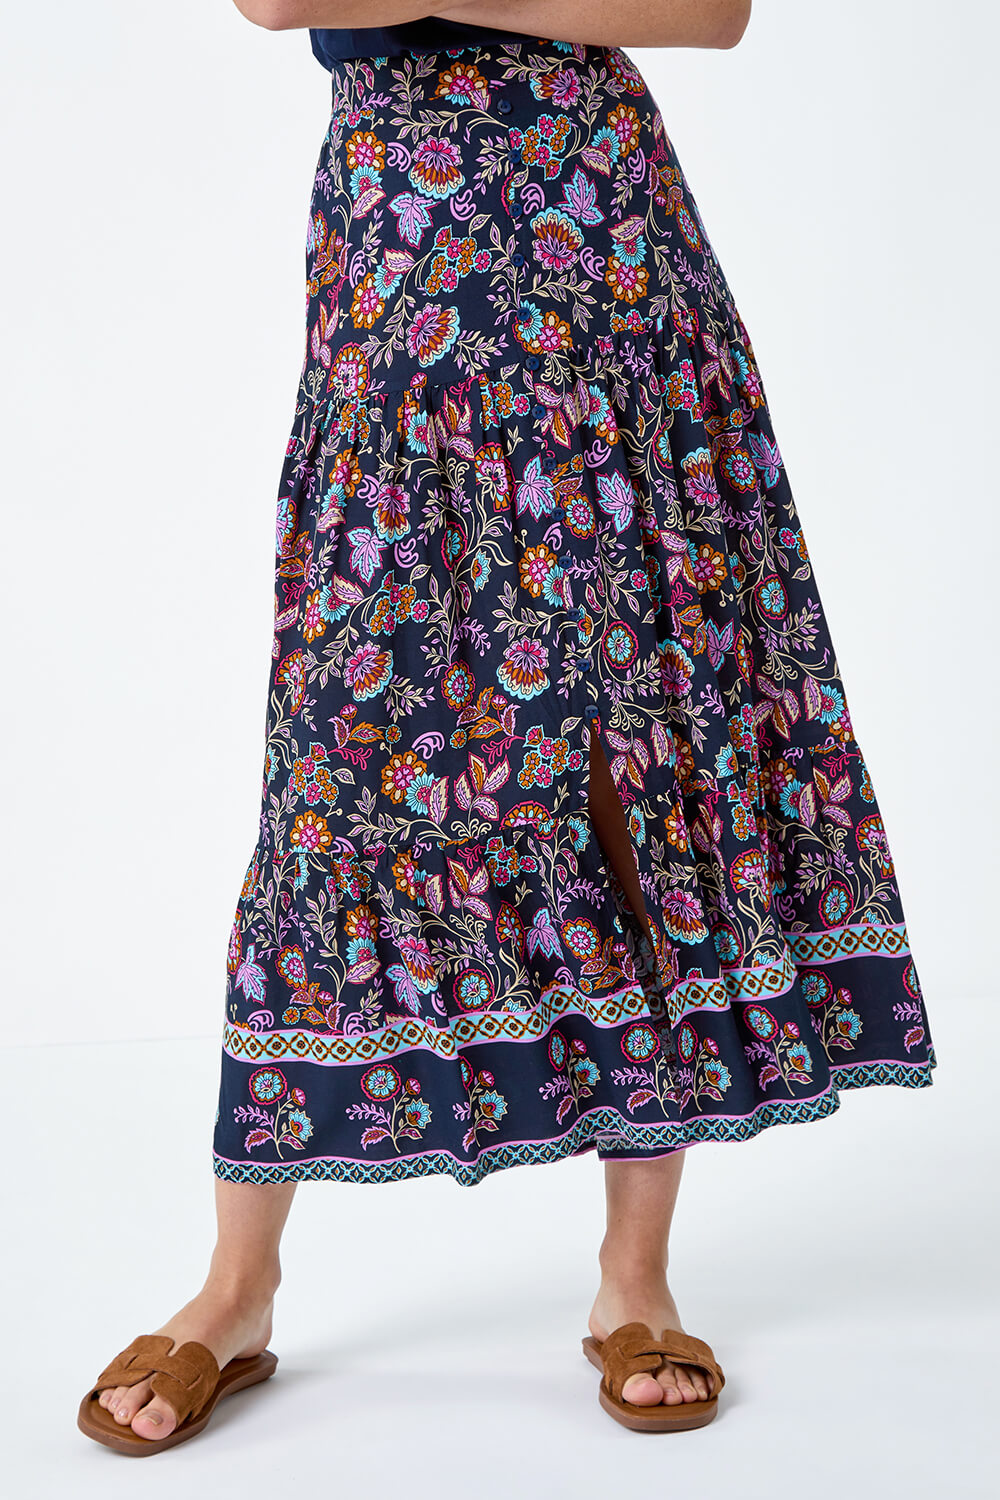 Purple Paisley Floral Button Tiered Midi Skirt, Image 4 of 5